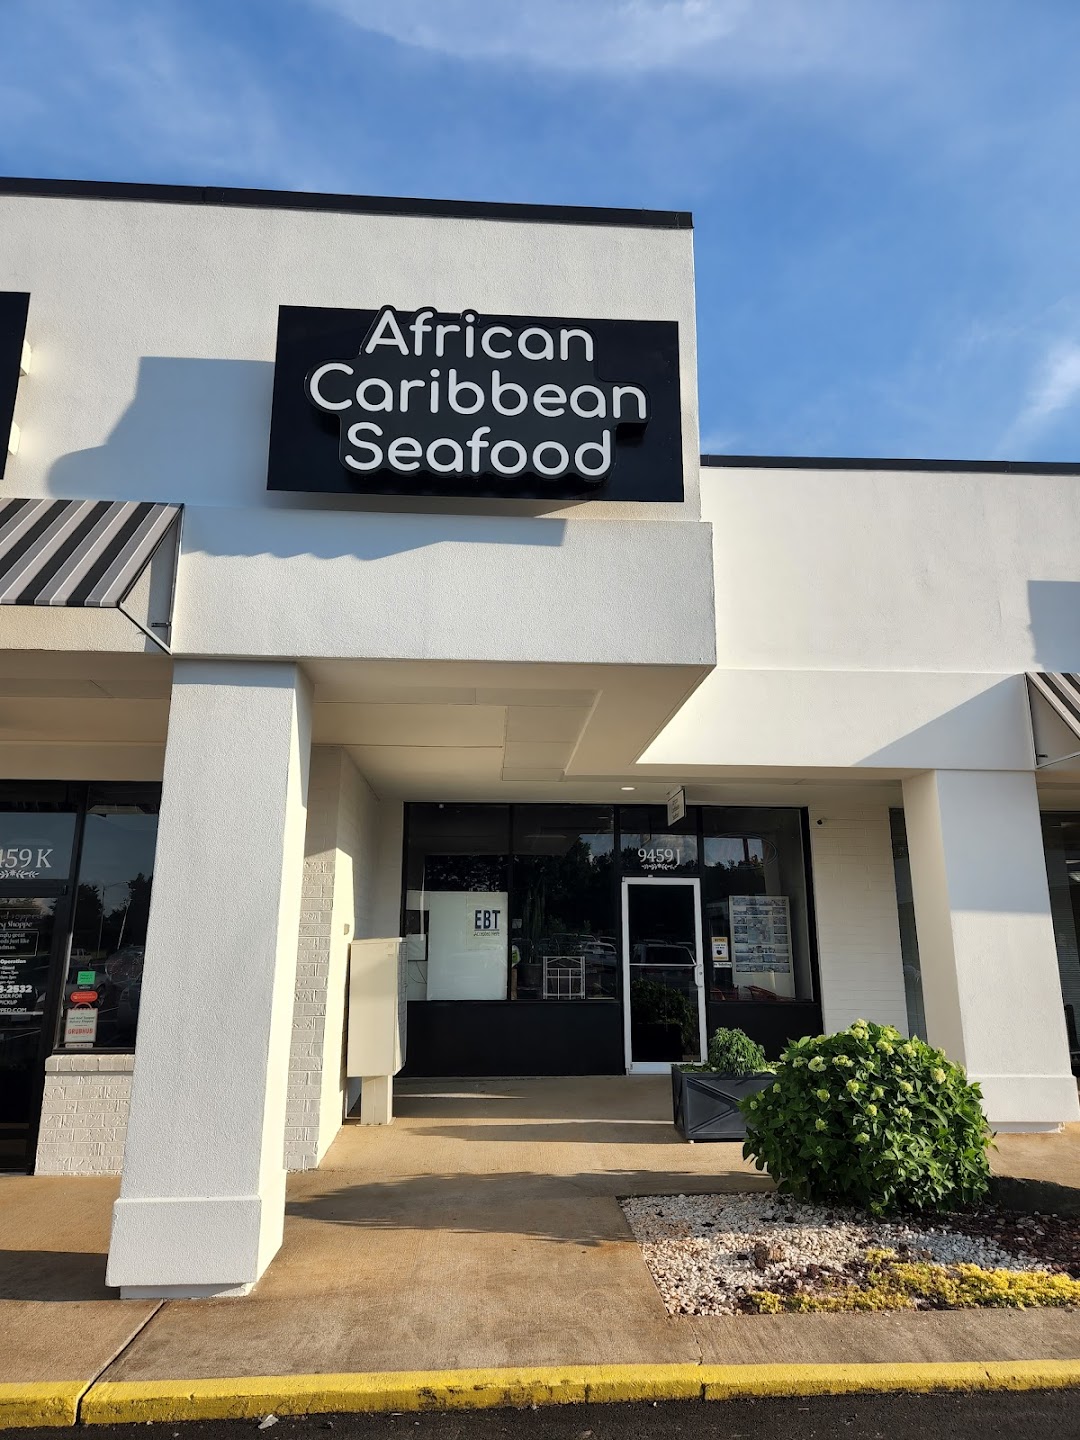 African Caribbean and Seafood Market